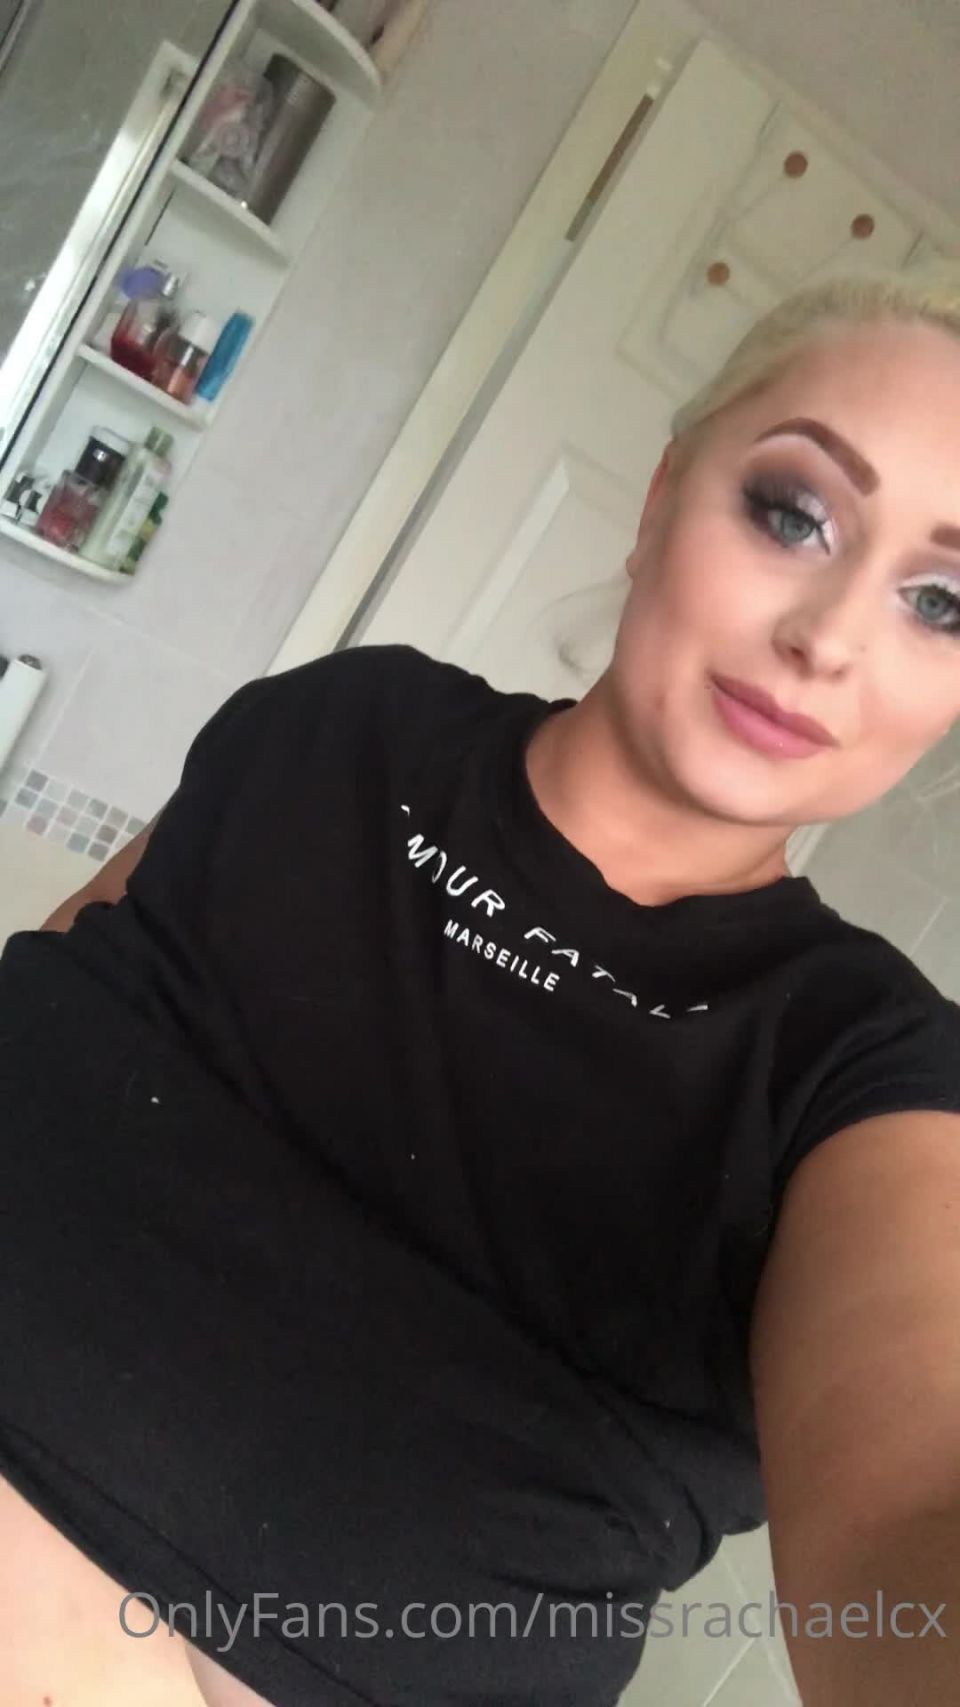 Rachael x - missrachaelcx () Missrachaelcx - just a video message from me and my big titties 18-05-2020